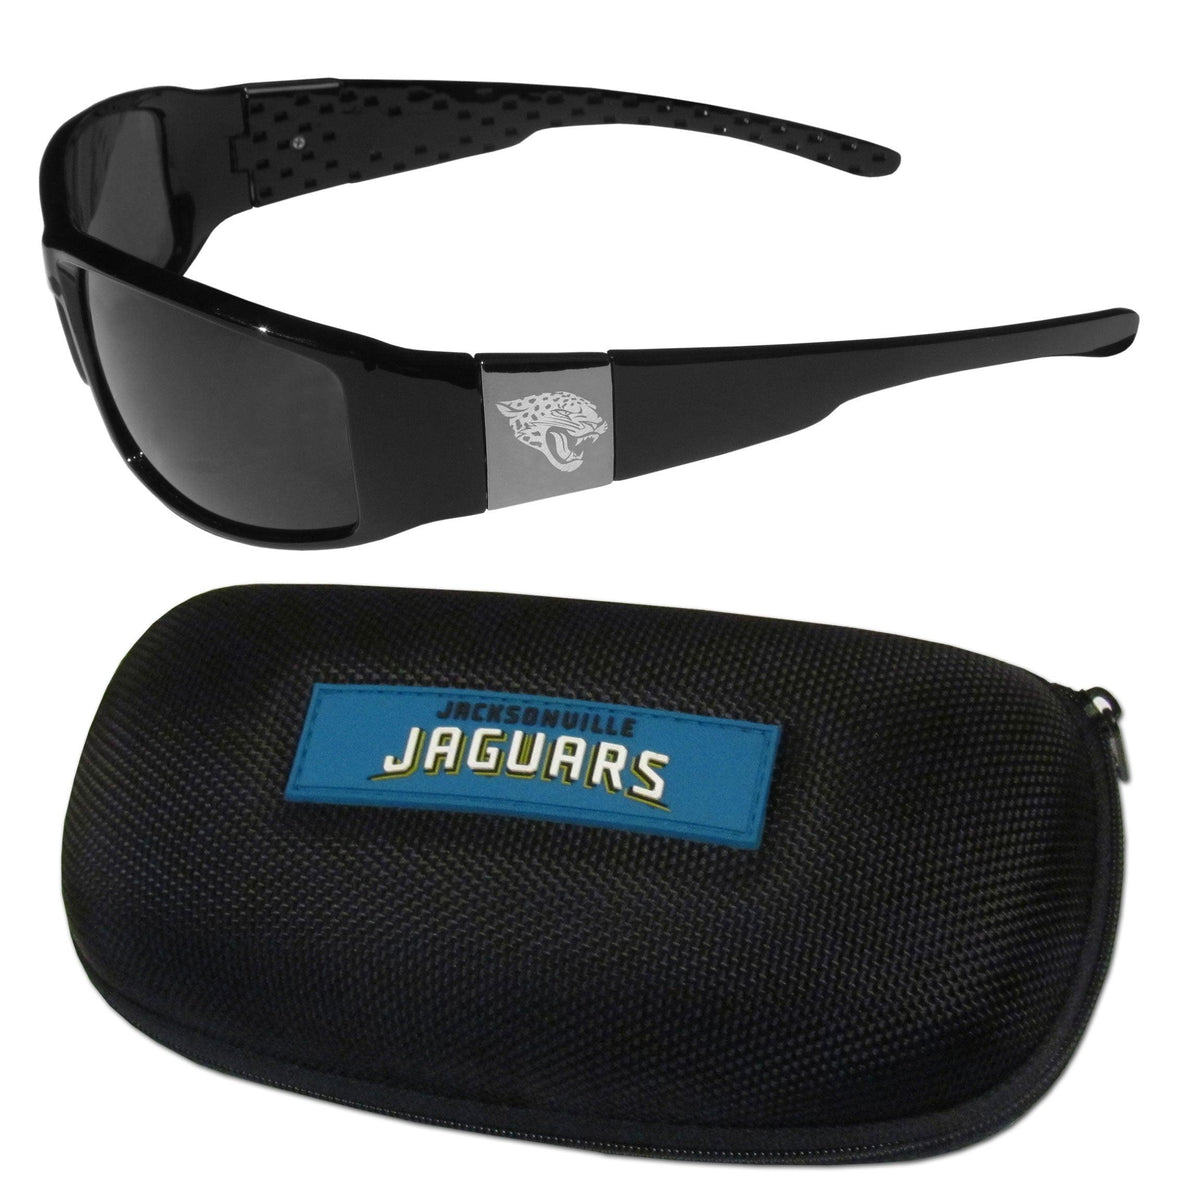 Jacksonville Jaguars Chrome Wrap Sunglasses and Zippered Carrying Case - Flyclothing LLC